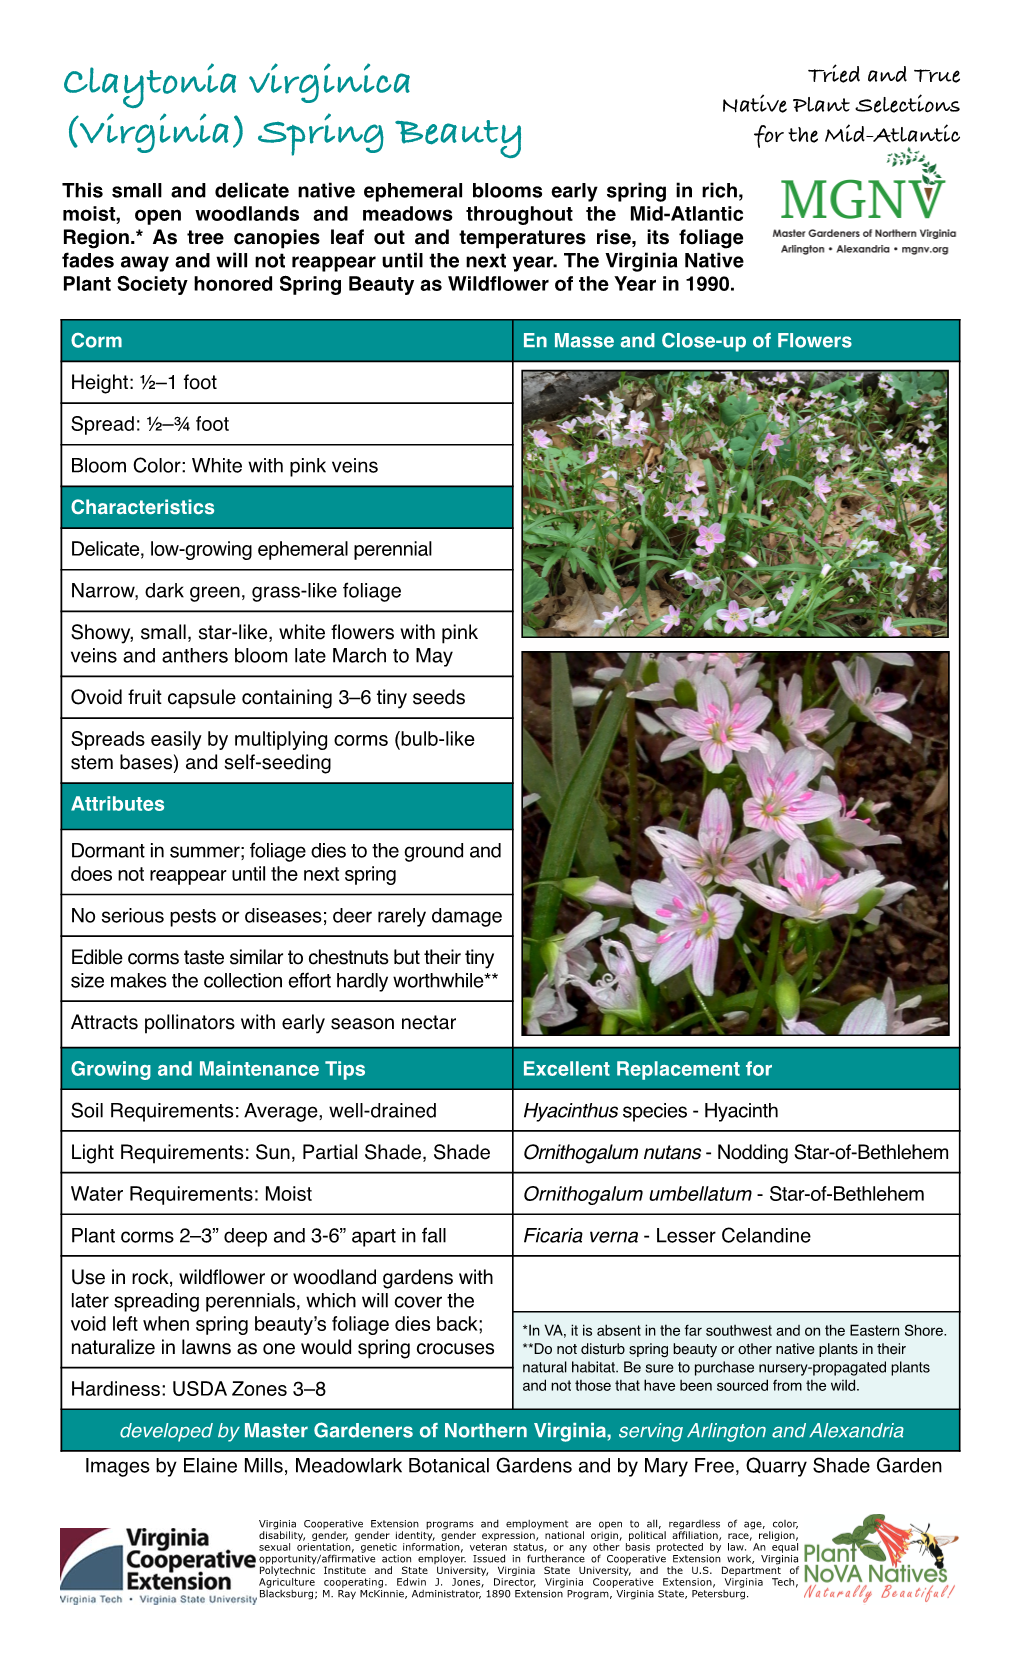 Claytonia Virginica Tried and True Native Plant Selections (Virginia) Spring Beauty for the Mid-Atlantic